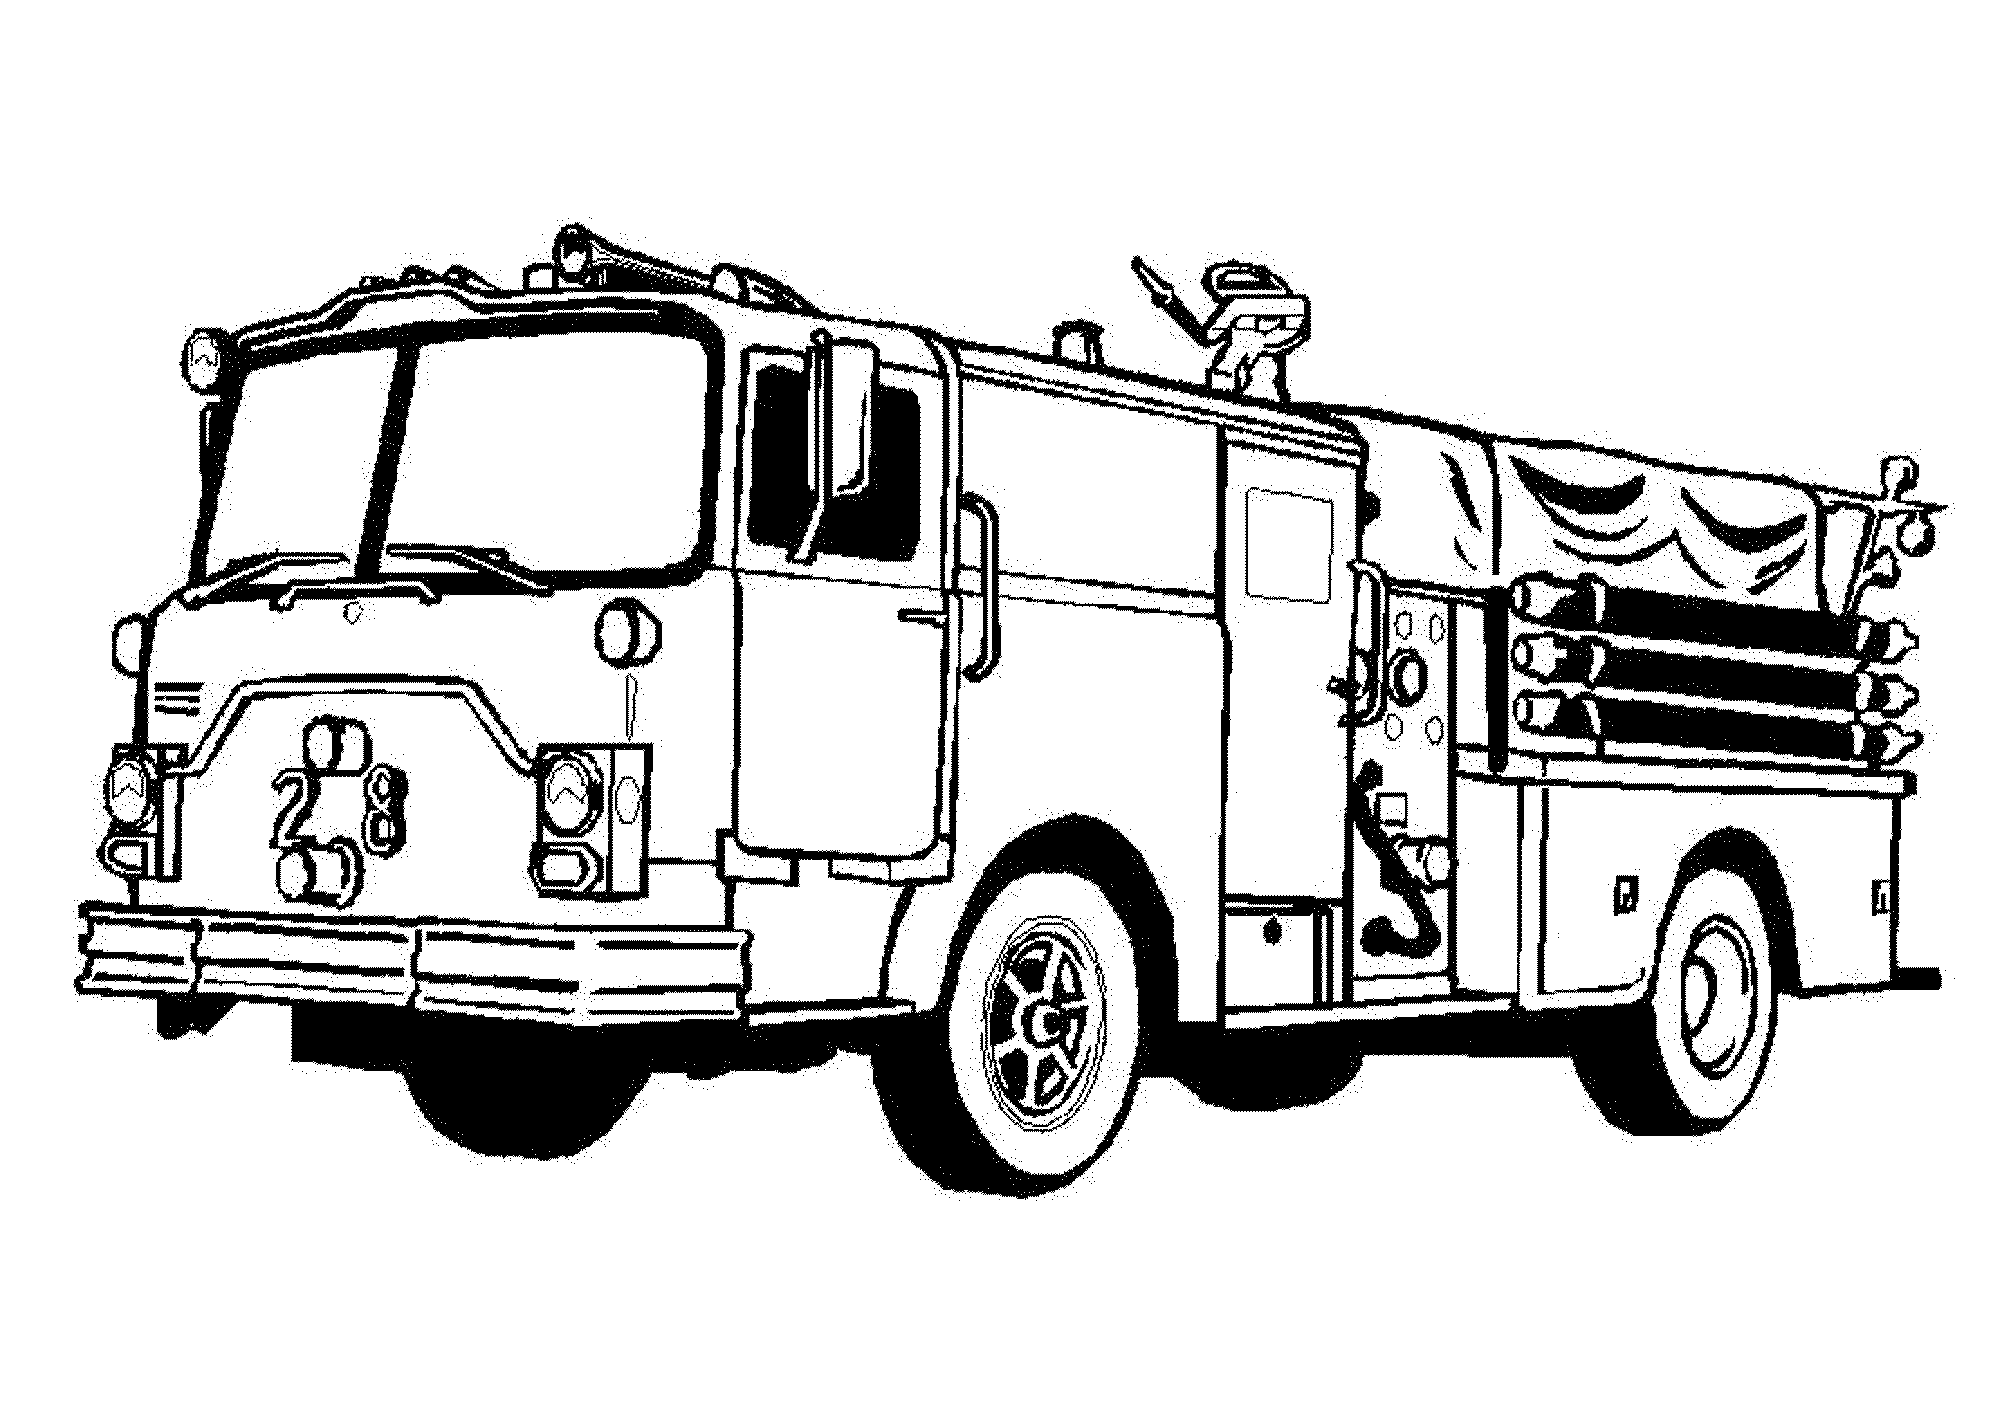 Print & Download - Educational Fire Truck Coloring Pages Giving Three